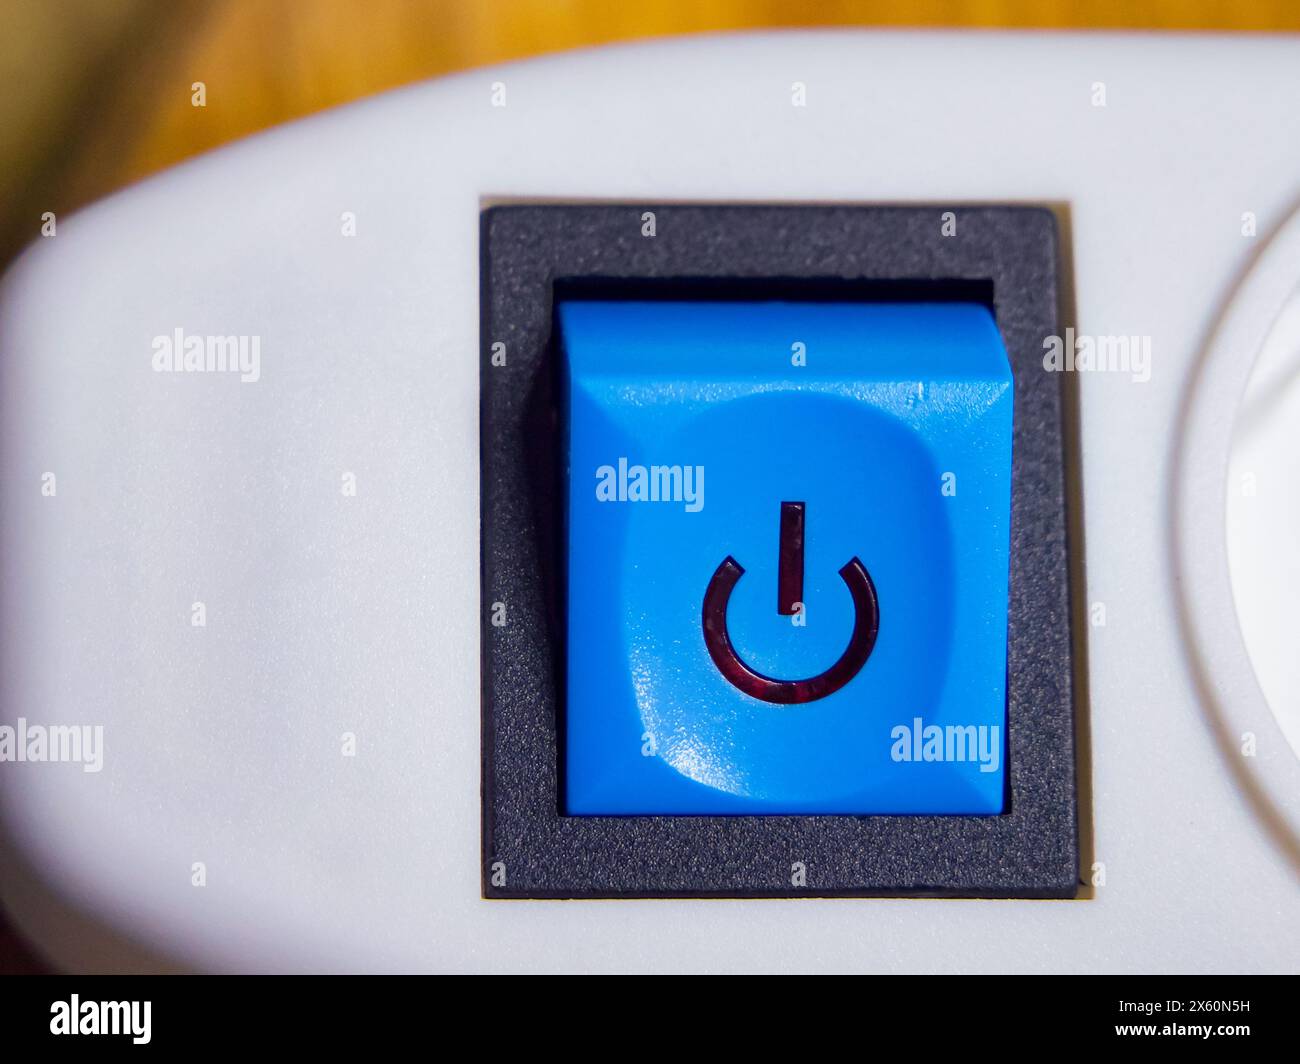 A blue power button with a power icon, set on a white device, suggesting functionality. Stock Photo